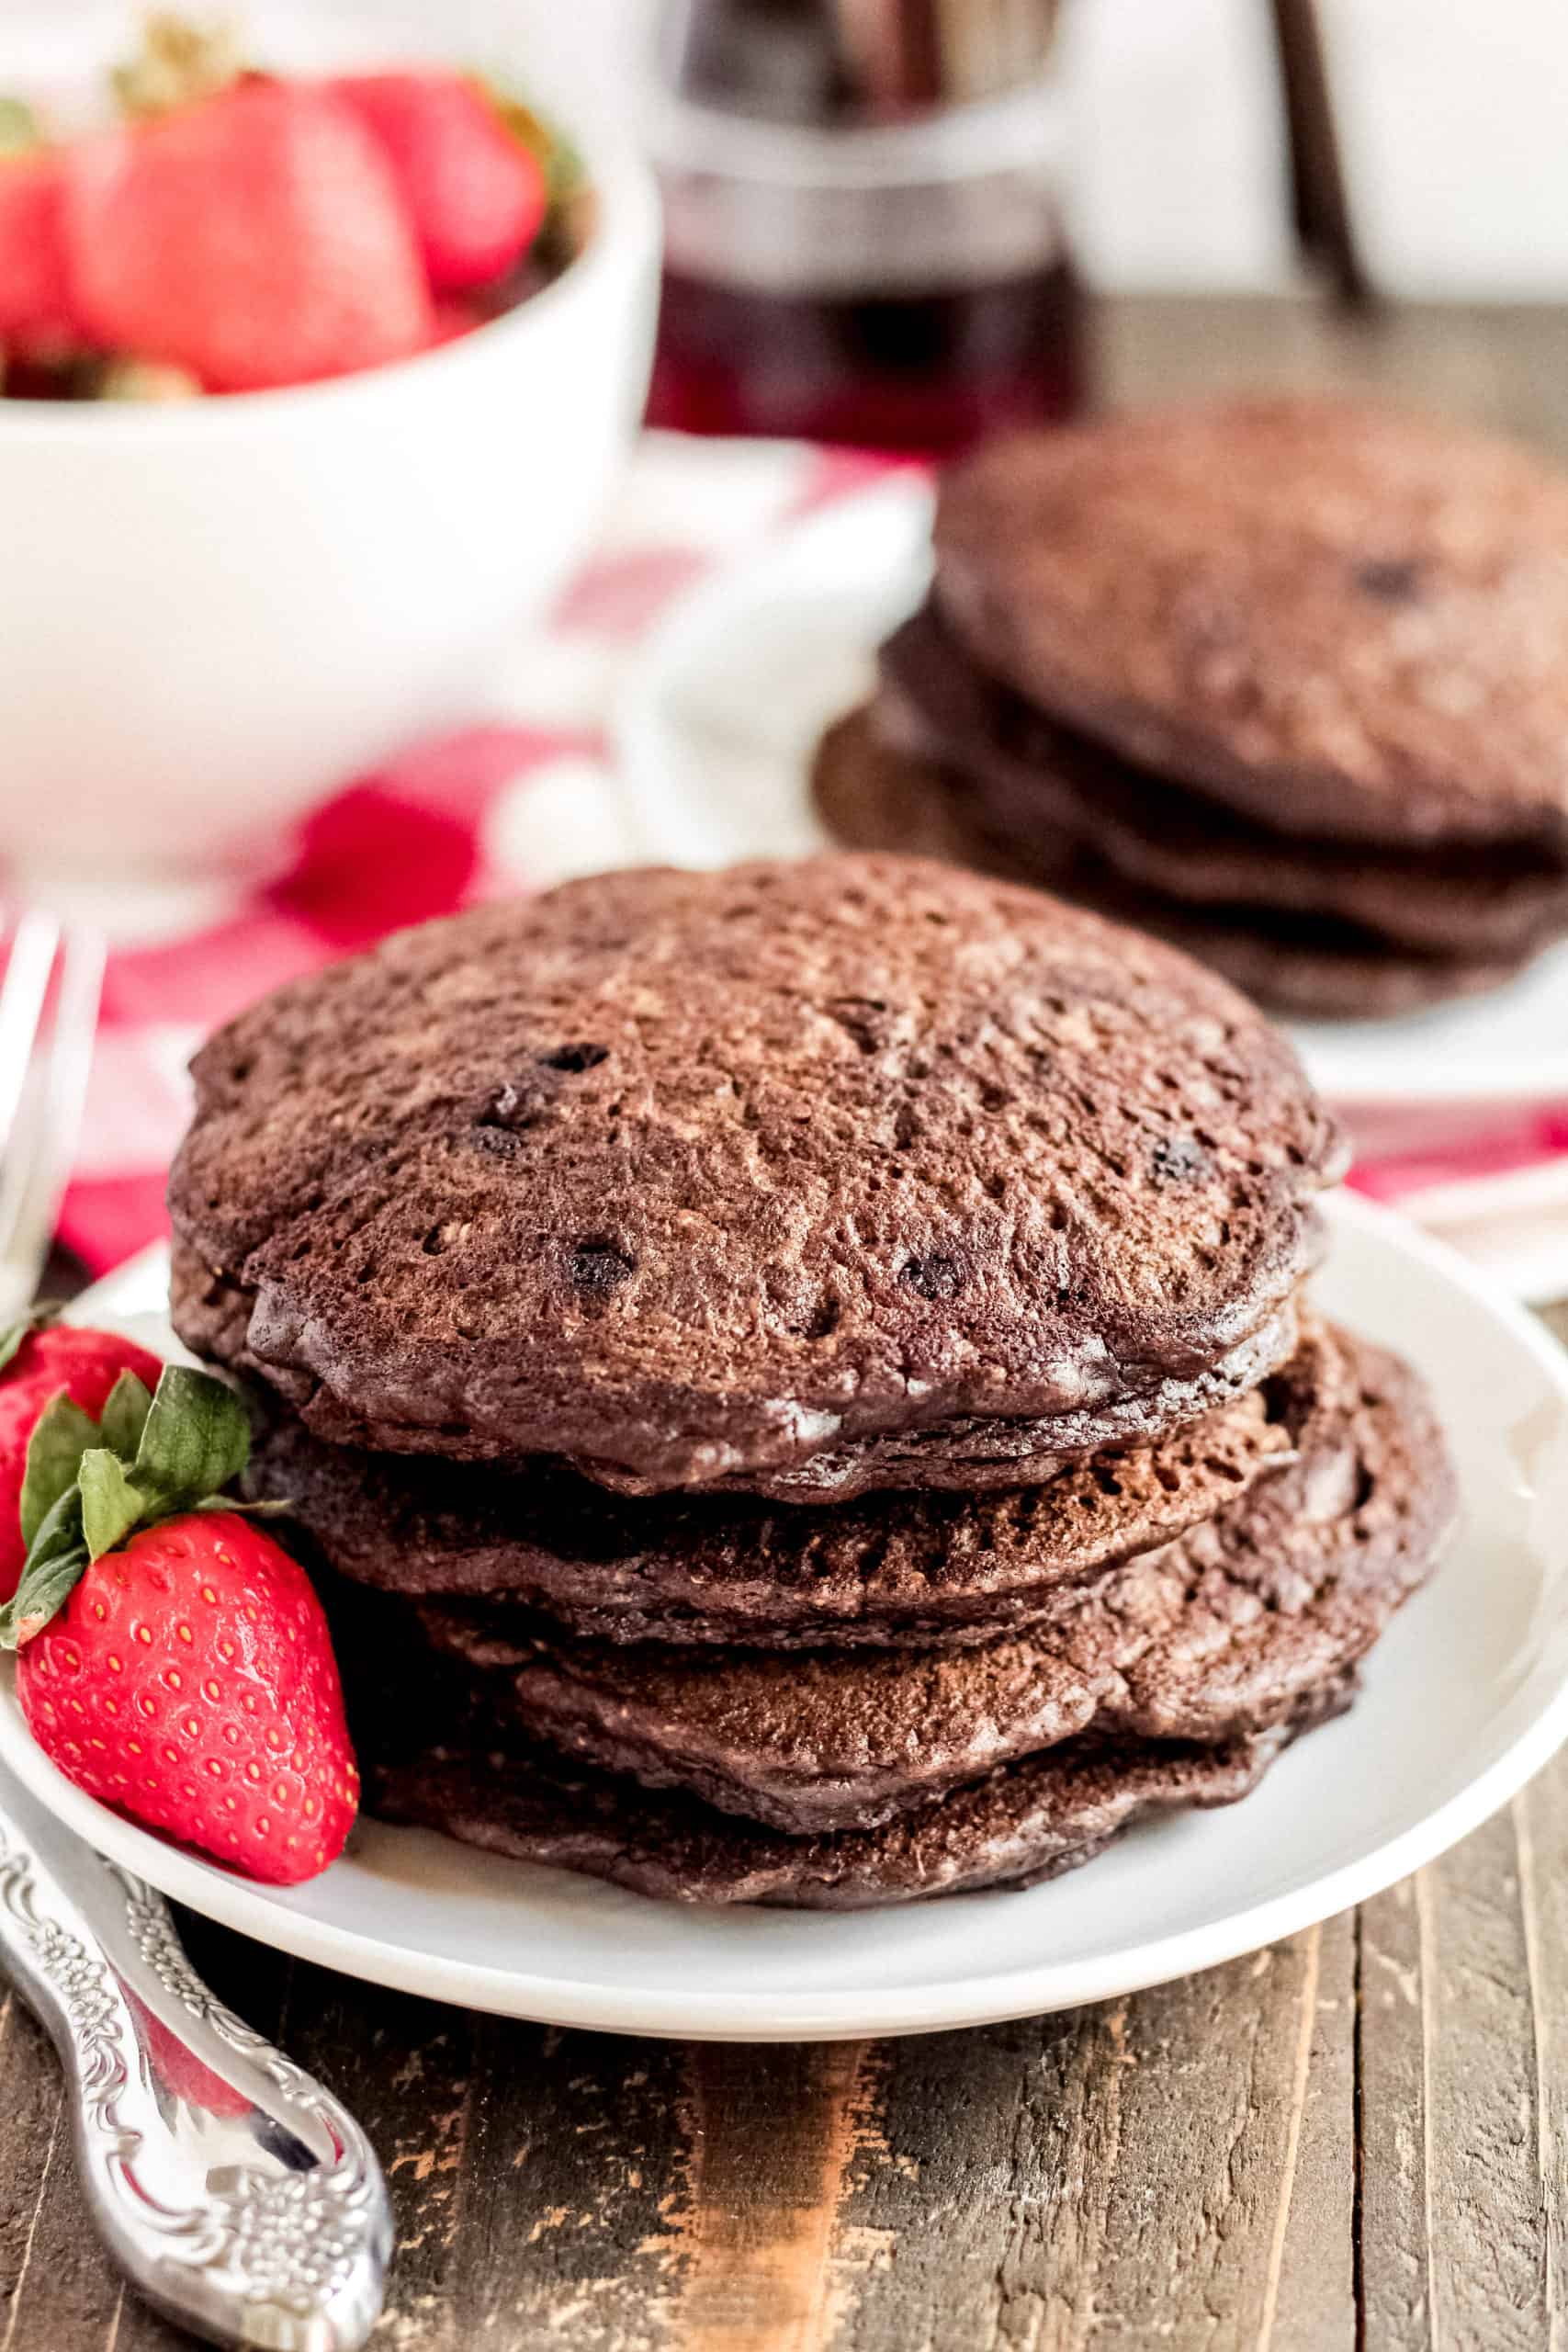 Chocolate Oat Pancakes (gluten-free, dairy-free option) - Mile High Mitts